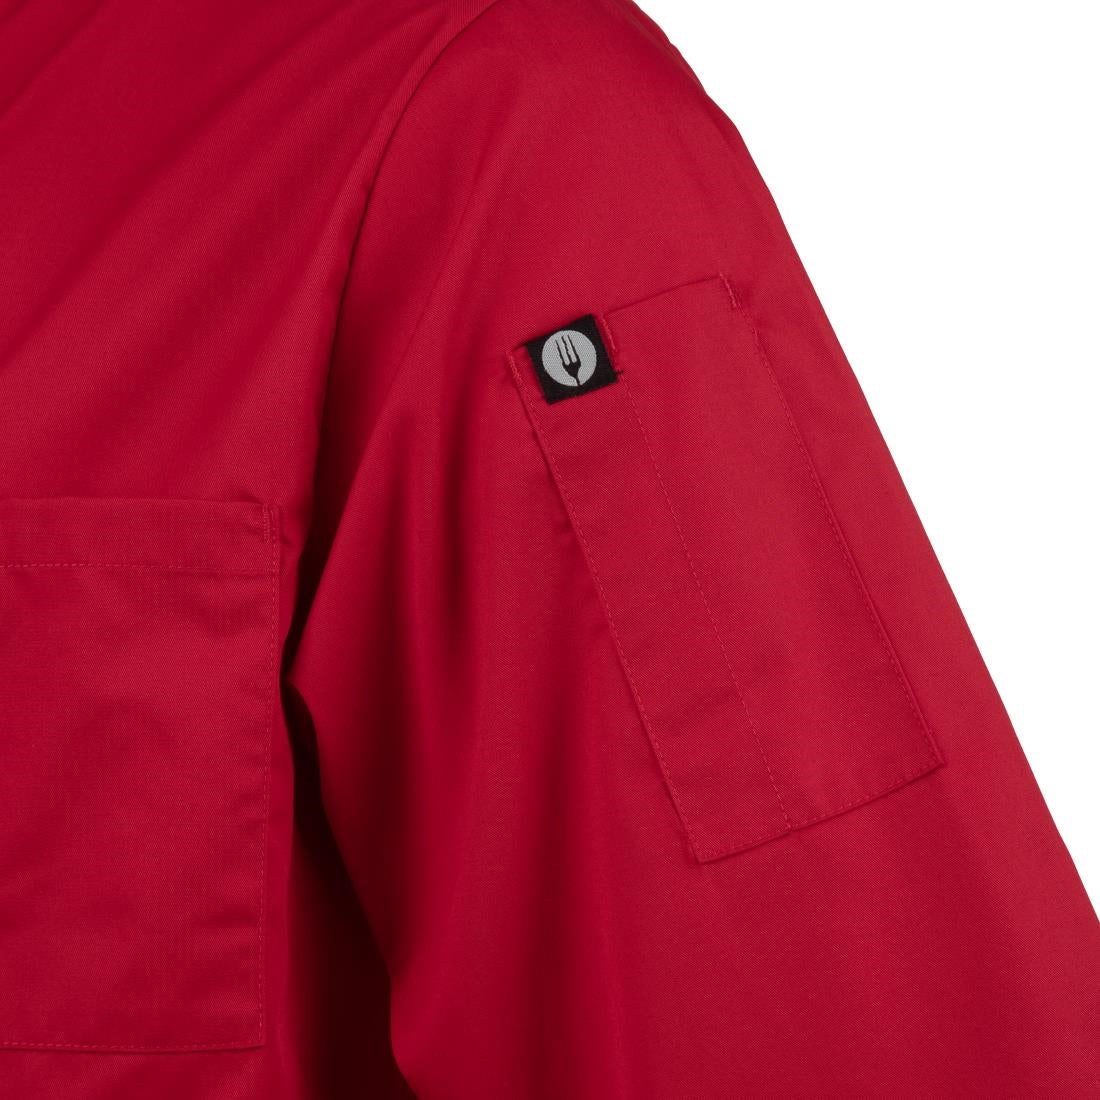 B106-XS Chef Works Unisex Jacket Red XS JD Catering Equipment Solutions Ltd